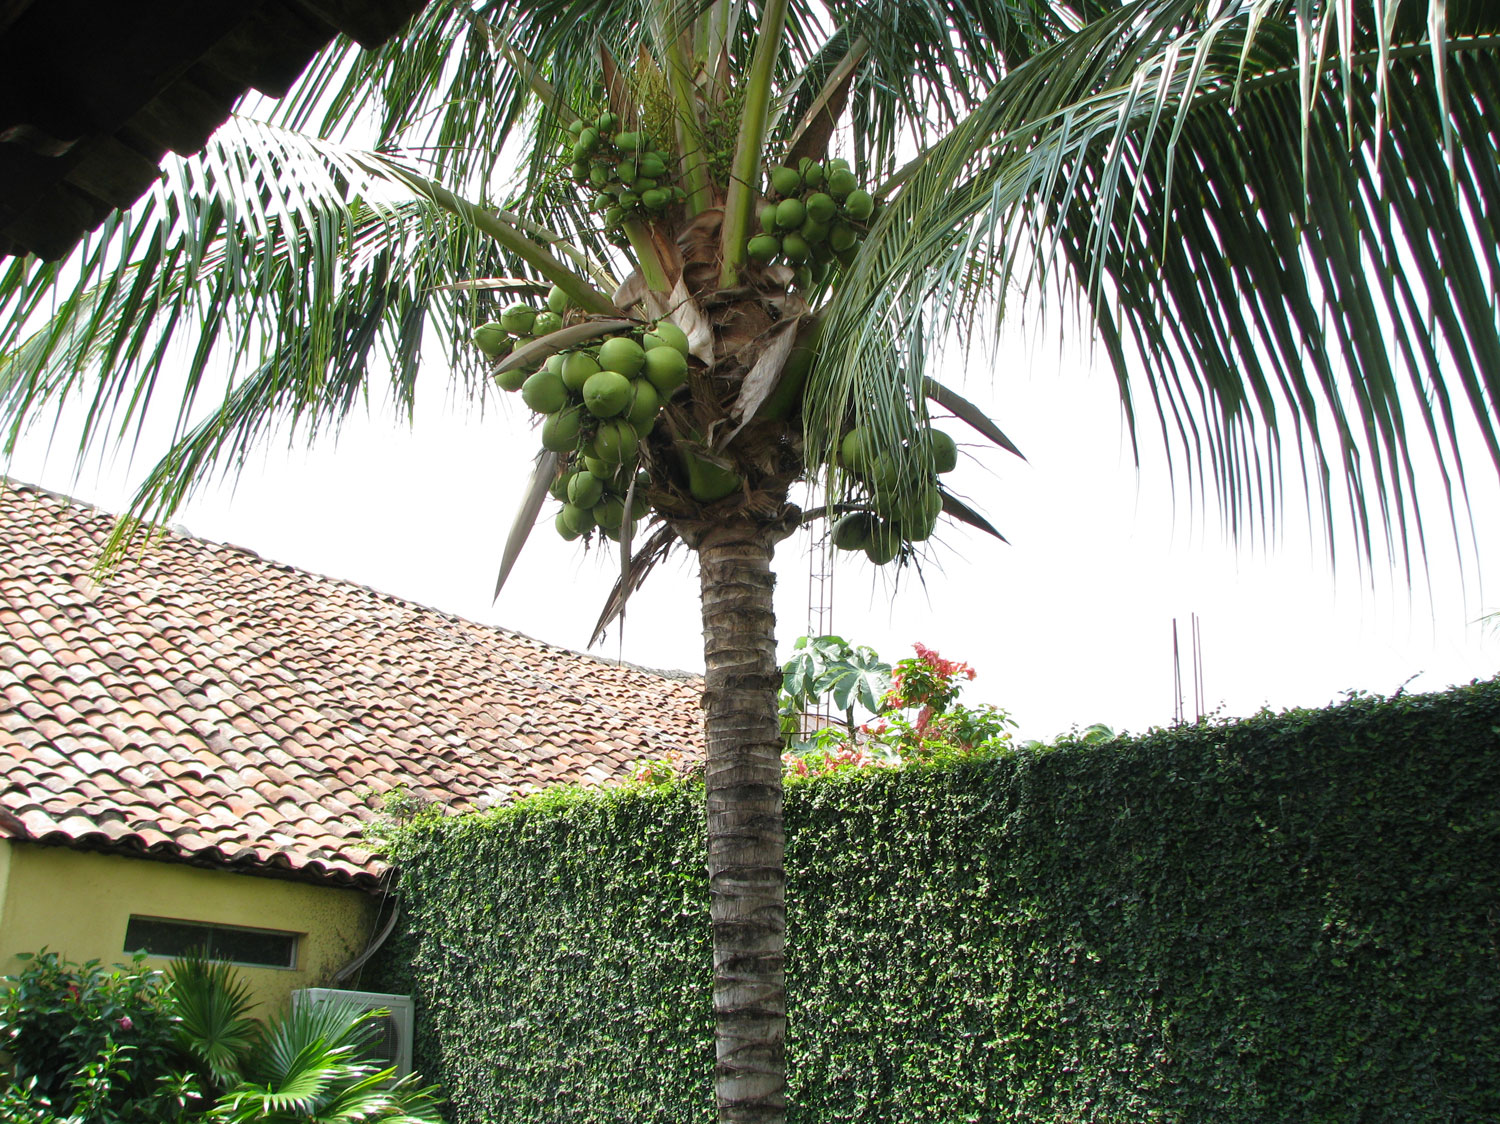 Coconuts on the courtyard palm tree